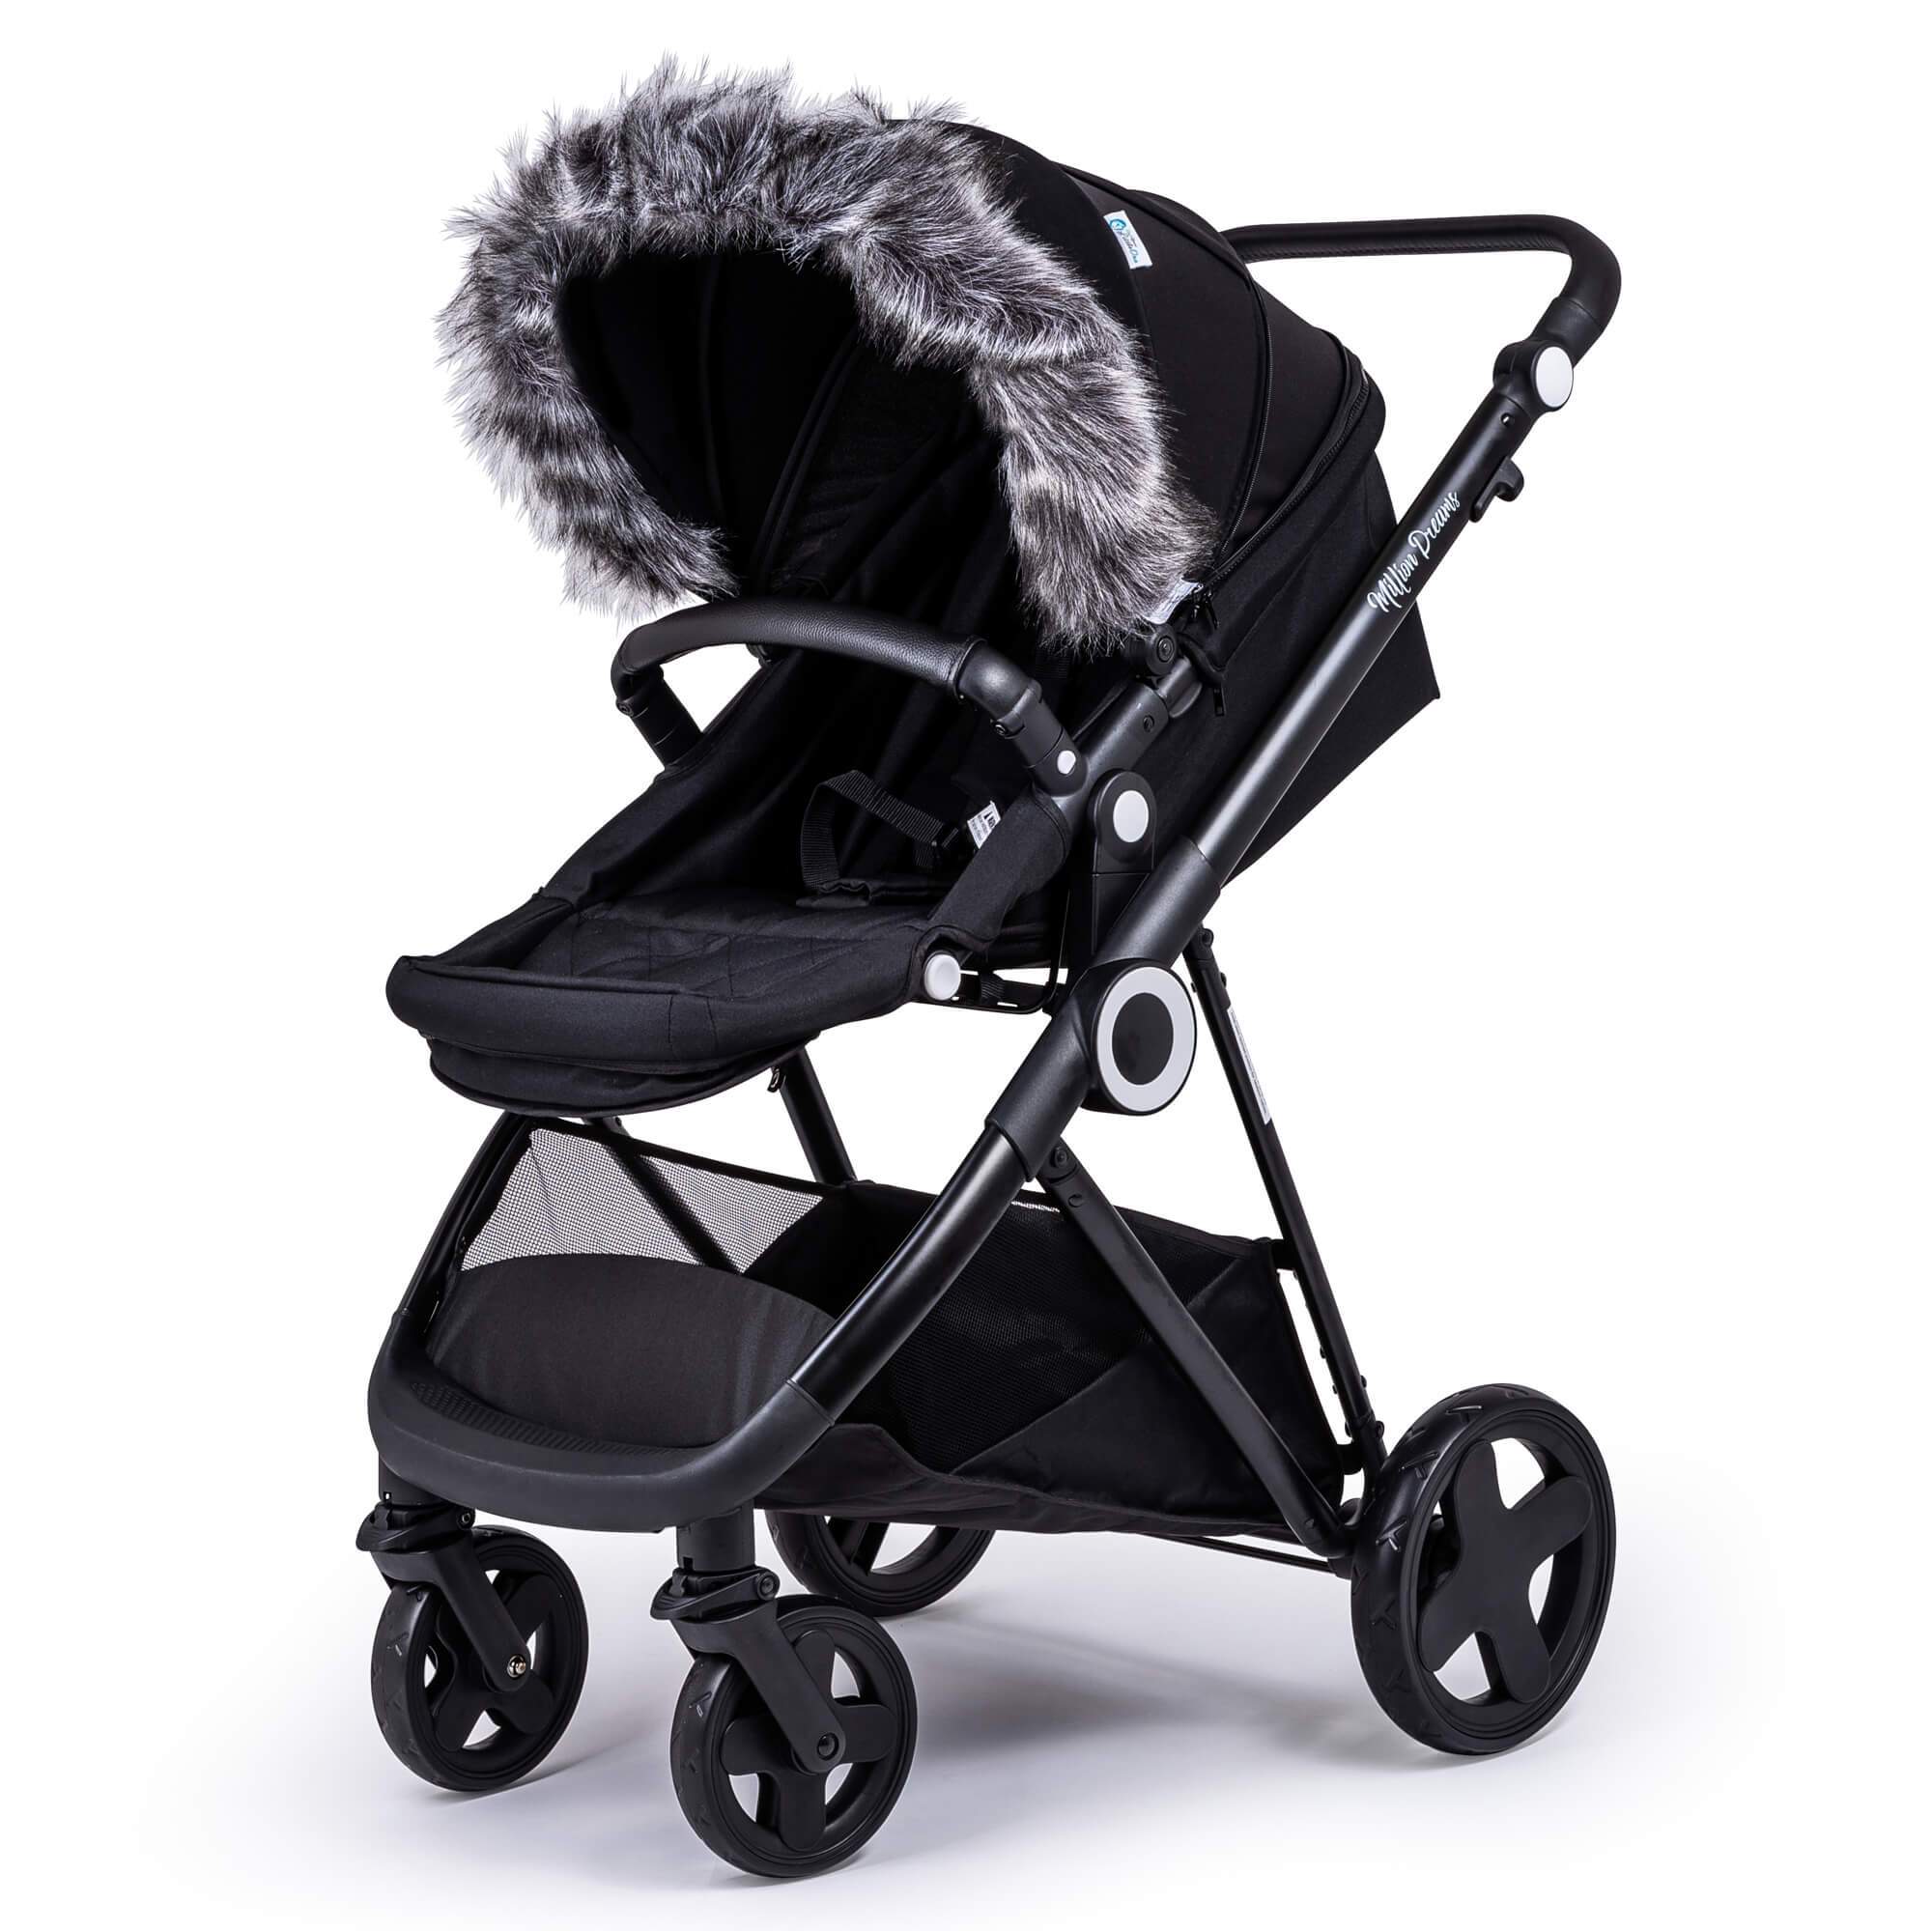 Pram Fur Hood Trim Attachment for Pushchair Compatible with BabiesRus - Dark Grey / Fits All Models | For Your Little One